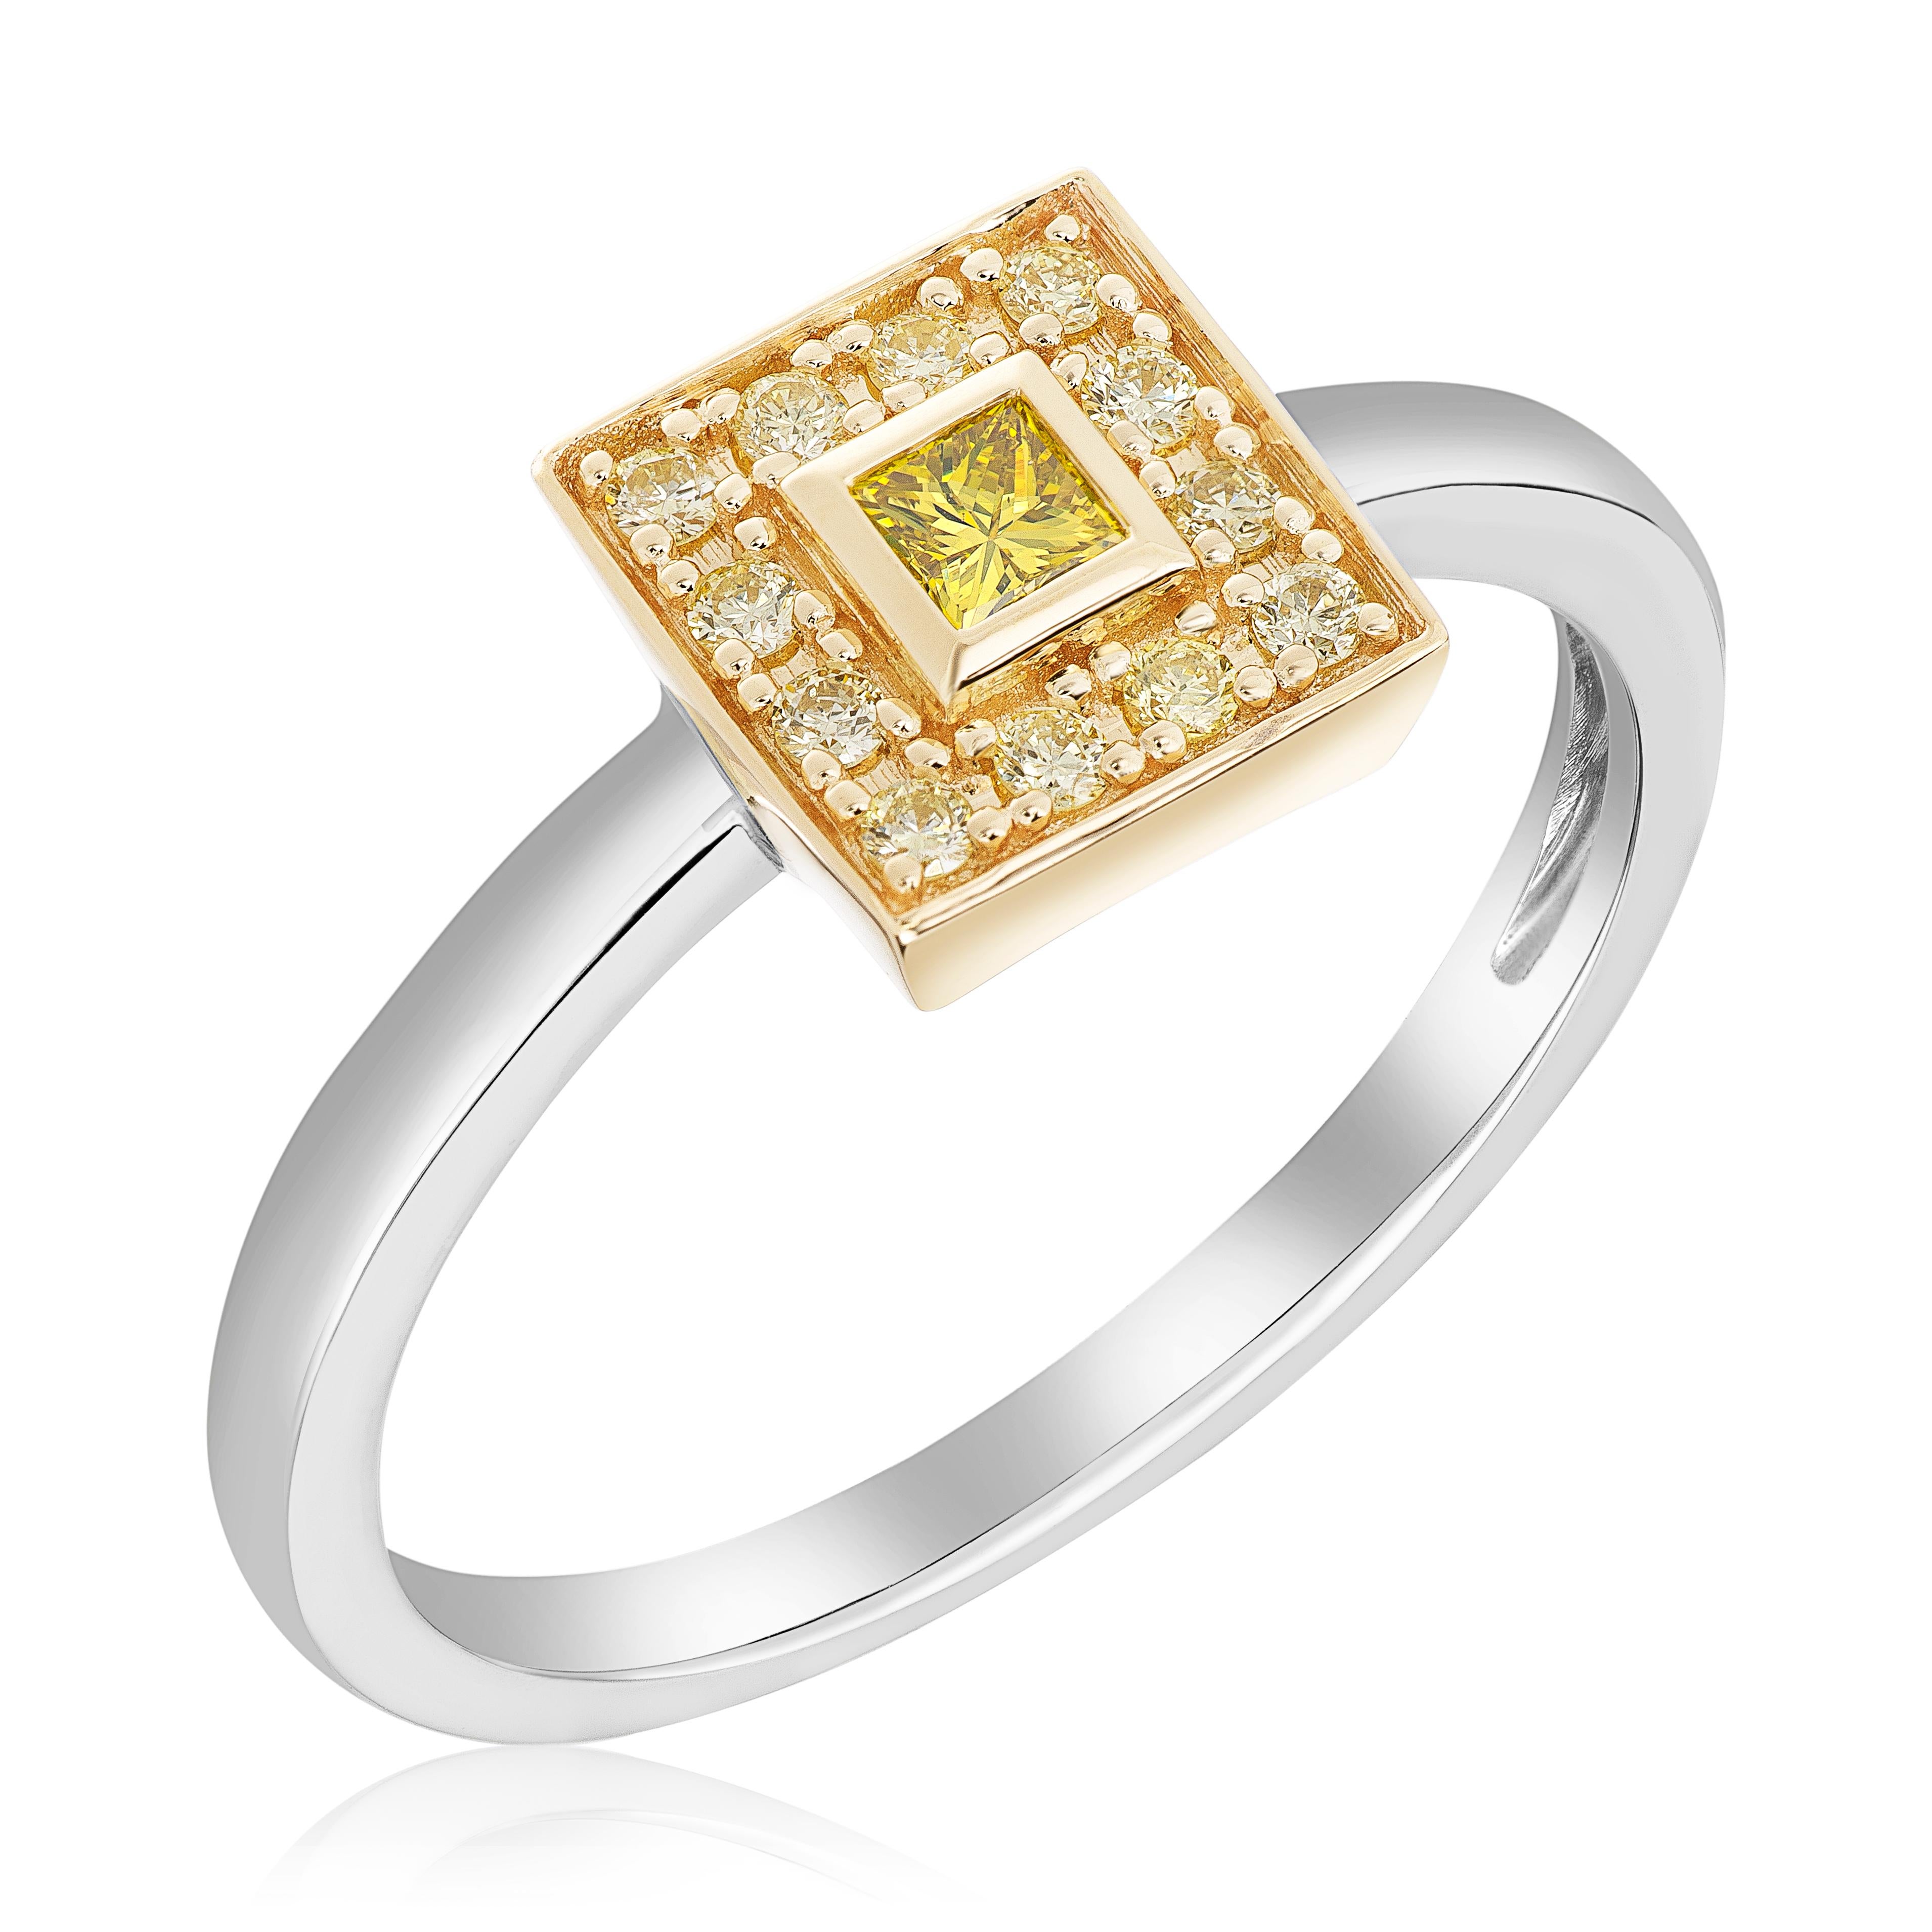 Stackable halo ring featuring a 0.10 fancy vivid yellow princess cut. Accented by 12 fancy yellow diamonds weighing 0.14 carats. Set in 14k yellow and white gold, size 7. This ring can be accessorized by any of our stackable rings or perhaps one